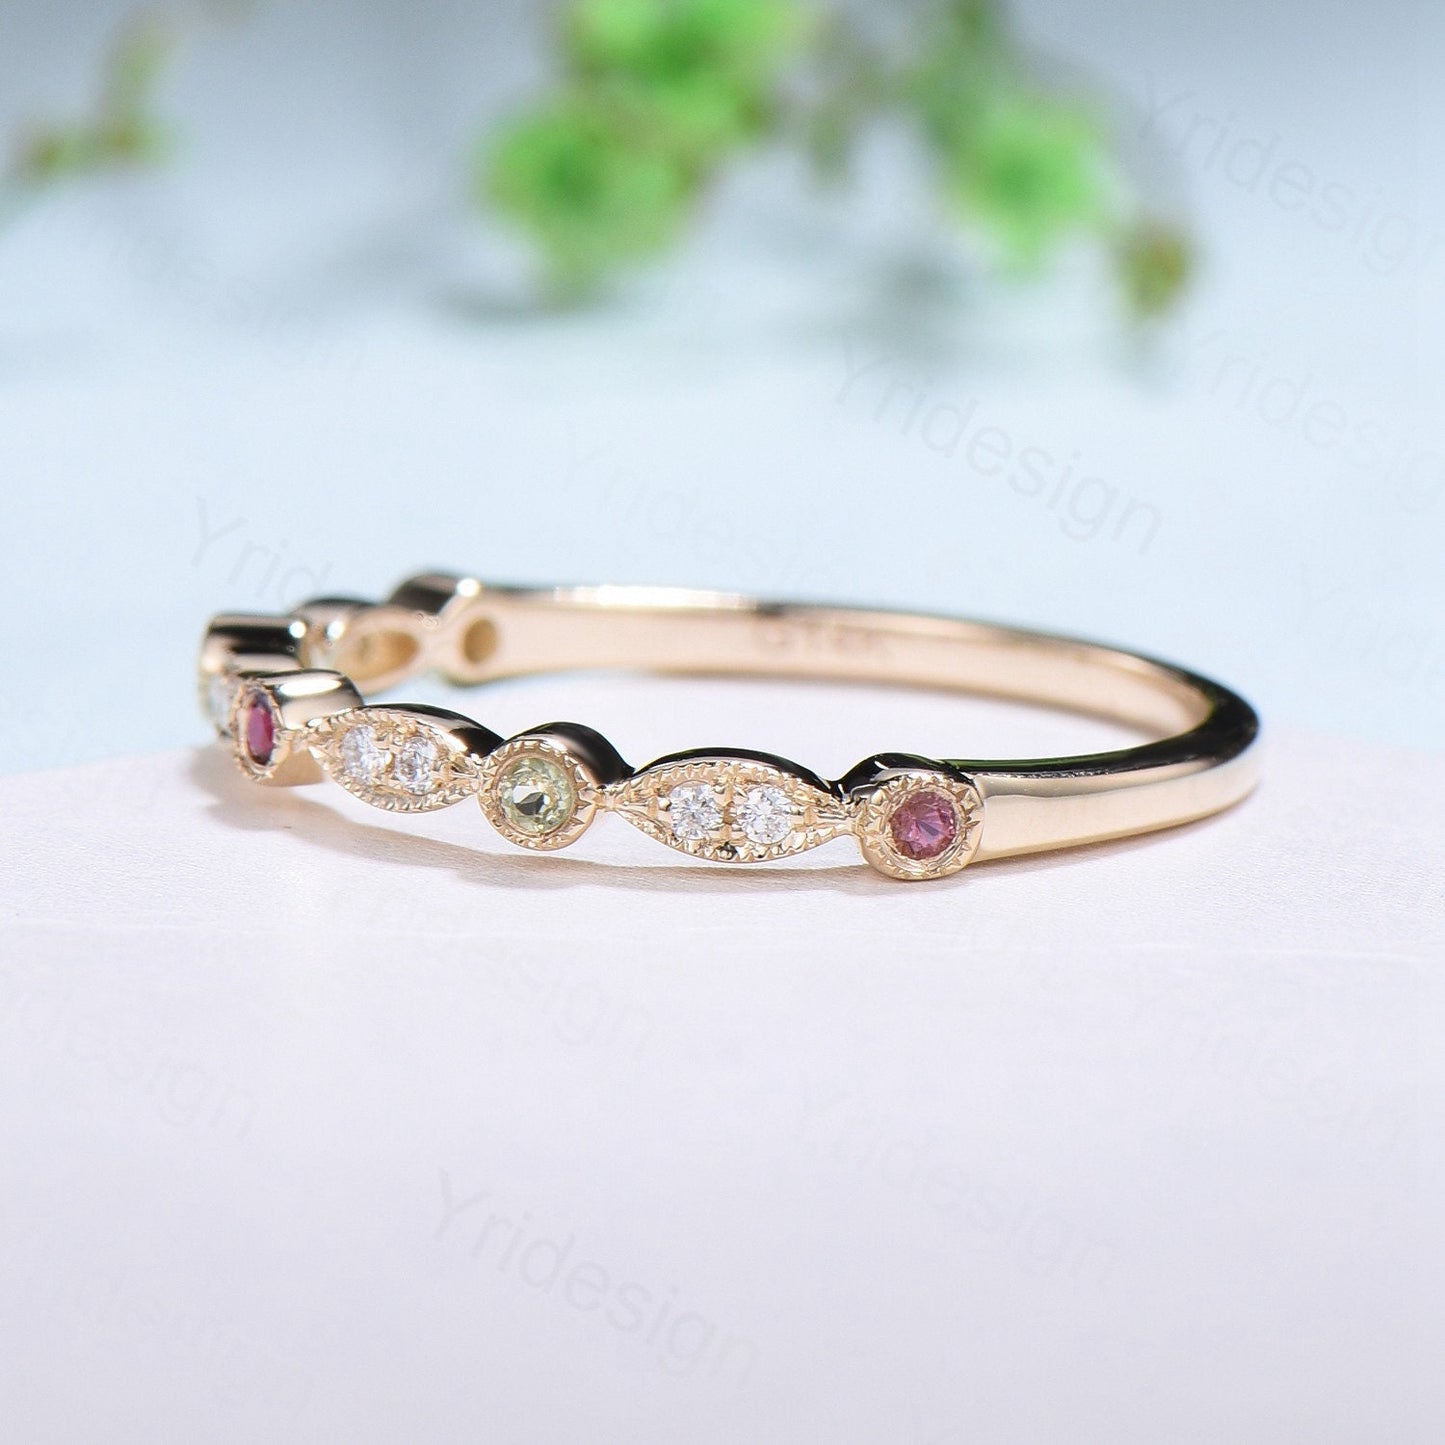 Vintage Half Eternity Diamond Wedding Band Unique Peridot Ruby Emerald Citrine Pink tourmaline  Stackable Matching Ring Anniversary Gift - PENFINE